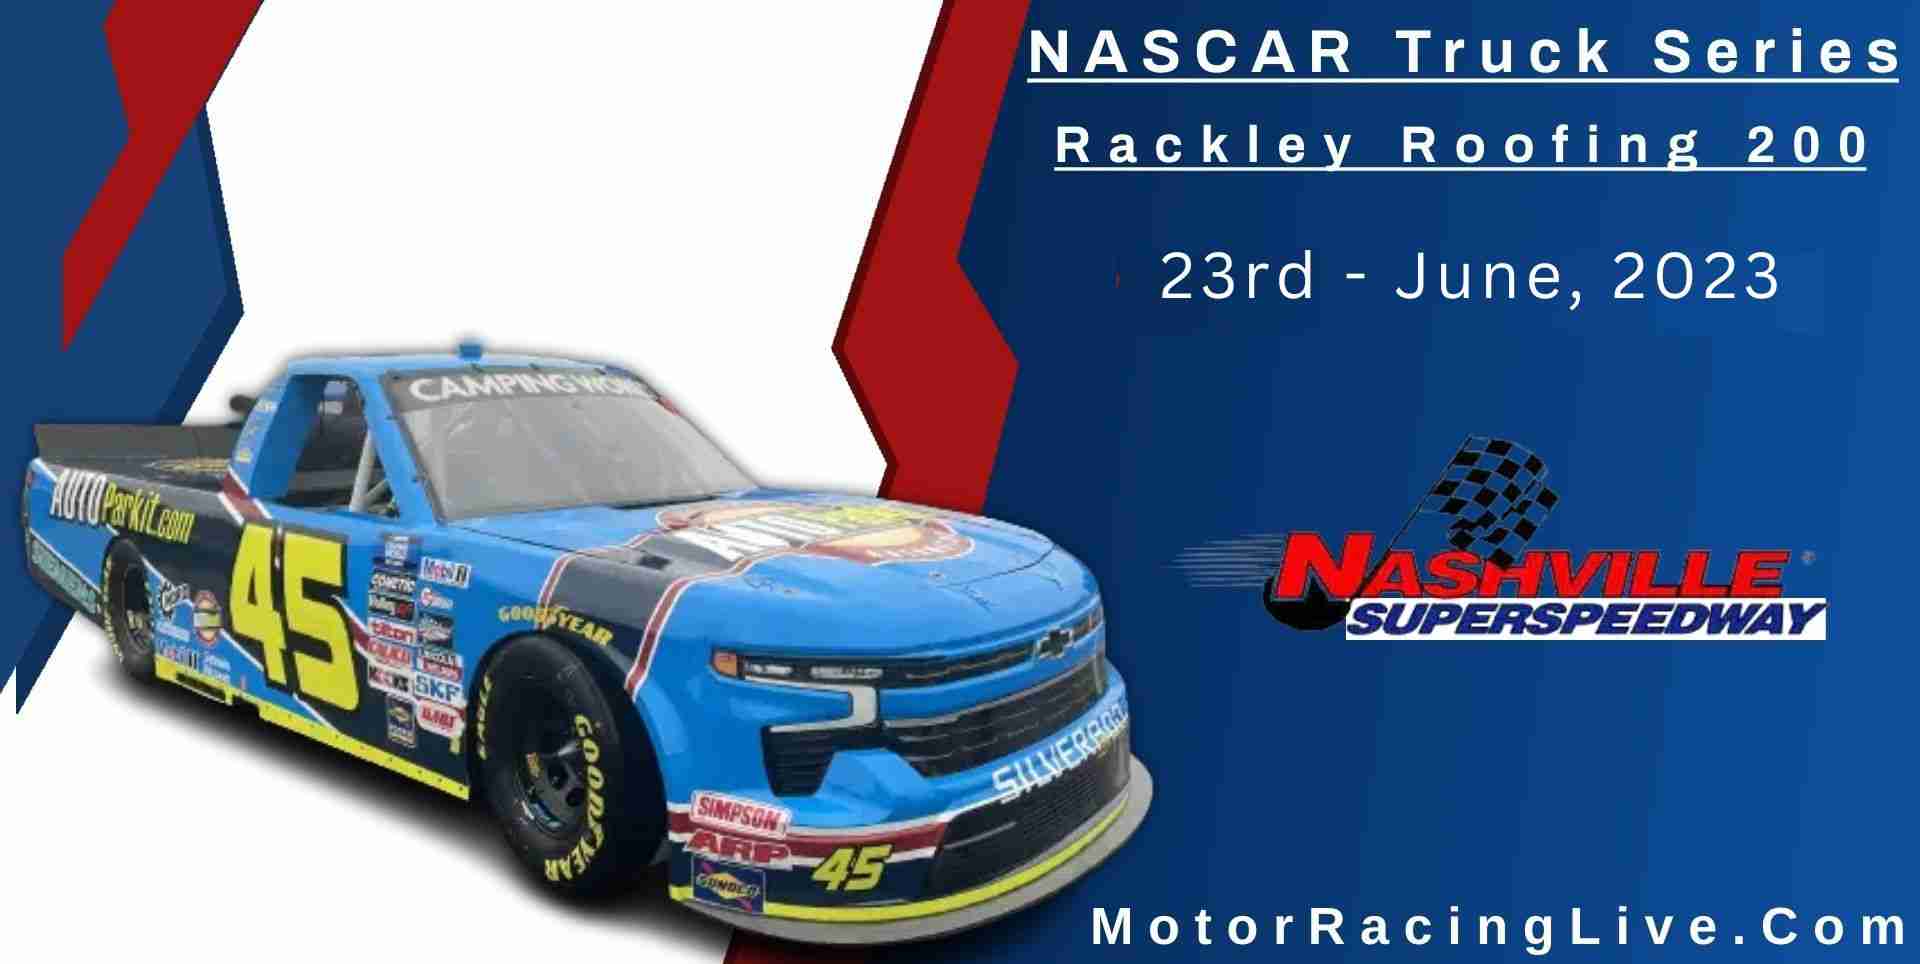 Rackley Roofing 200 Nascar Truck Series 2023 Live Stream